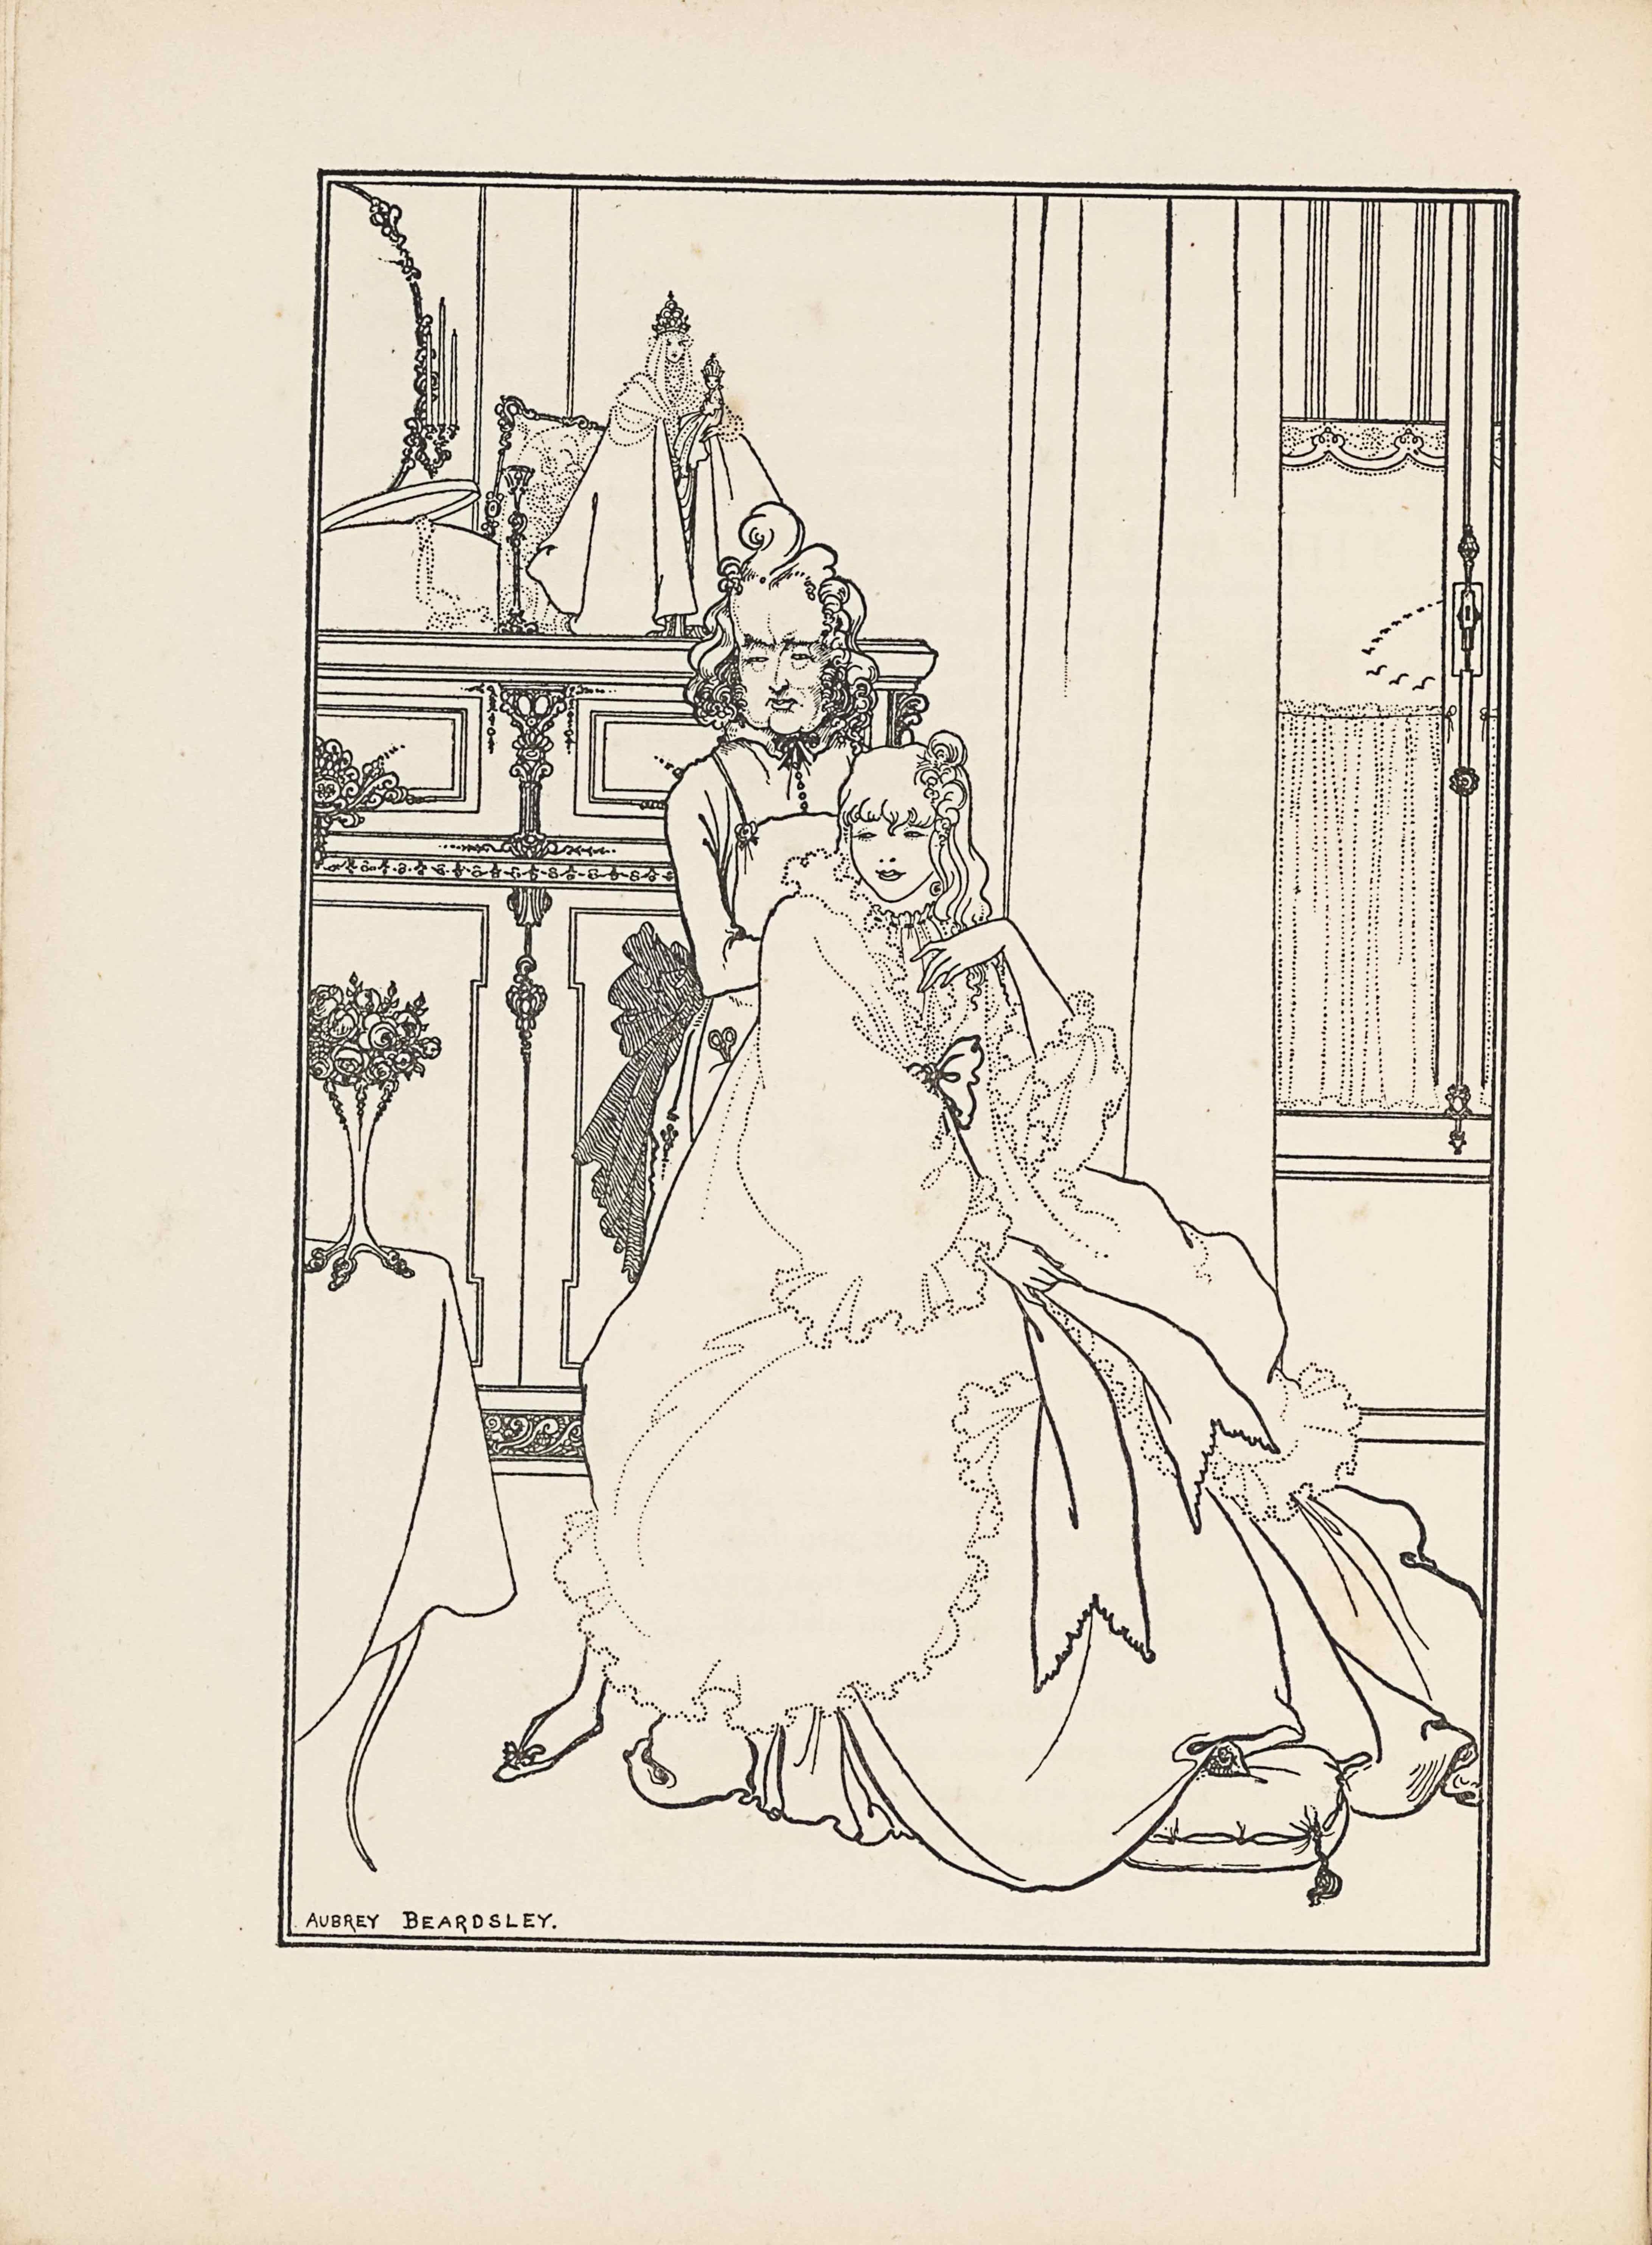 This line-block reproduction of Beardsley’s pen-and-ink drawing is in portrait orientation, facing the poem by Bardsley it illustrates, “The Ballad of a Barber,” on p. 91. The image shows a seated woman or girl (“The Princess”) facing the viewer, with a male figure (the barber) standing behind her. They are shown inside a dressing room, with a small religious figurine standing on the fireplace mantel behind them. In the foreground and to the left is the edge of a table. The table has one plain curved leg sticking out from underneath a white tablecloth that falls nearly to the ground. On top of the table is a small three-footed vase containing a bouquet of small roses and leaves. To the right of the table in the foreground is the woman sitting on a chair, turned to face slightly to the right, but with her directly to the viewer. She is wearing a large ruffled dressing gown; one big bow tied at her chest has long ribbons extending down to her knees. Her feet rest on a tasseled pillow on the floor. Her right hand rests on her lap while her left hand is lifted to her chin. Her mouth is slightly opened and her eyes look to the left side of the page. She has mid-length wavy hair with a little hairpiece on the left side of the top of her head. The headpiece is a small clip of swirled material. Behind her and to the left on the page is a standing male figure, the barber. His right foot sticks out to the left of the woman’s skirt, wearing a small slipper with a bow at the toe. He is wearing an apron with a pocket containing a pair of scissors. He has a button-up shirt with a black bow-tie underneath the apron, which is tied with a large dark coloured bow. The barber also has a slightly opened mouth and a crease between his brows. His hair is elaborately coiffed with a pompadour and waves at the side. Behind and to the left in the background is a fireplace mantel that is ornamented with swirling lines. On top of the mantle is a half visible oval shaped mirror with a slightly ornamented edge. In front and to the right of the mirror is a hat box that has its lid slightly off-kilter and a string of pearls hanging out off the edge. To the right of the box on the mantle is a candlestick holder. There is a little picture frame balanced on its bottom right corner and leaned against the wall. In front of that frame is a small female figurine standing on the mantle. She is wearing a robe or cape that falls widely around her. She has light and straight short hair and is wearing a crown. She has her left arm extended out in front of her holding a baby [this could be a religious statuette of the Madonna and Child]. The baby’s body appears in profile facing to the left side of the page, but the baby’s head is turned to face the viewer. The baby has on a long gown and also is wearing a crown. To the right of the mantle is a plain and light coloured curtain hanging down the side of a small window. The window and its surrounding draperies start just above the floor edge and extend past the picture frame. The window has a delineation in the middle of wood framing with an ornamented stick and a small box in the centre. The window has a frilly half-curtain covering the bottom half and an ornamental blind on the top, with a fringed valance. In the small bit of visible window there is a trail of birds flying in a curved line in the distance. In the bottom left corner is the artist’s signature:: “AUBREY BEARDSLEY.” [caps]. The image is framed by a double-lined edge.